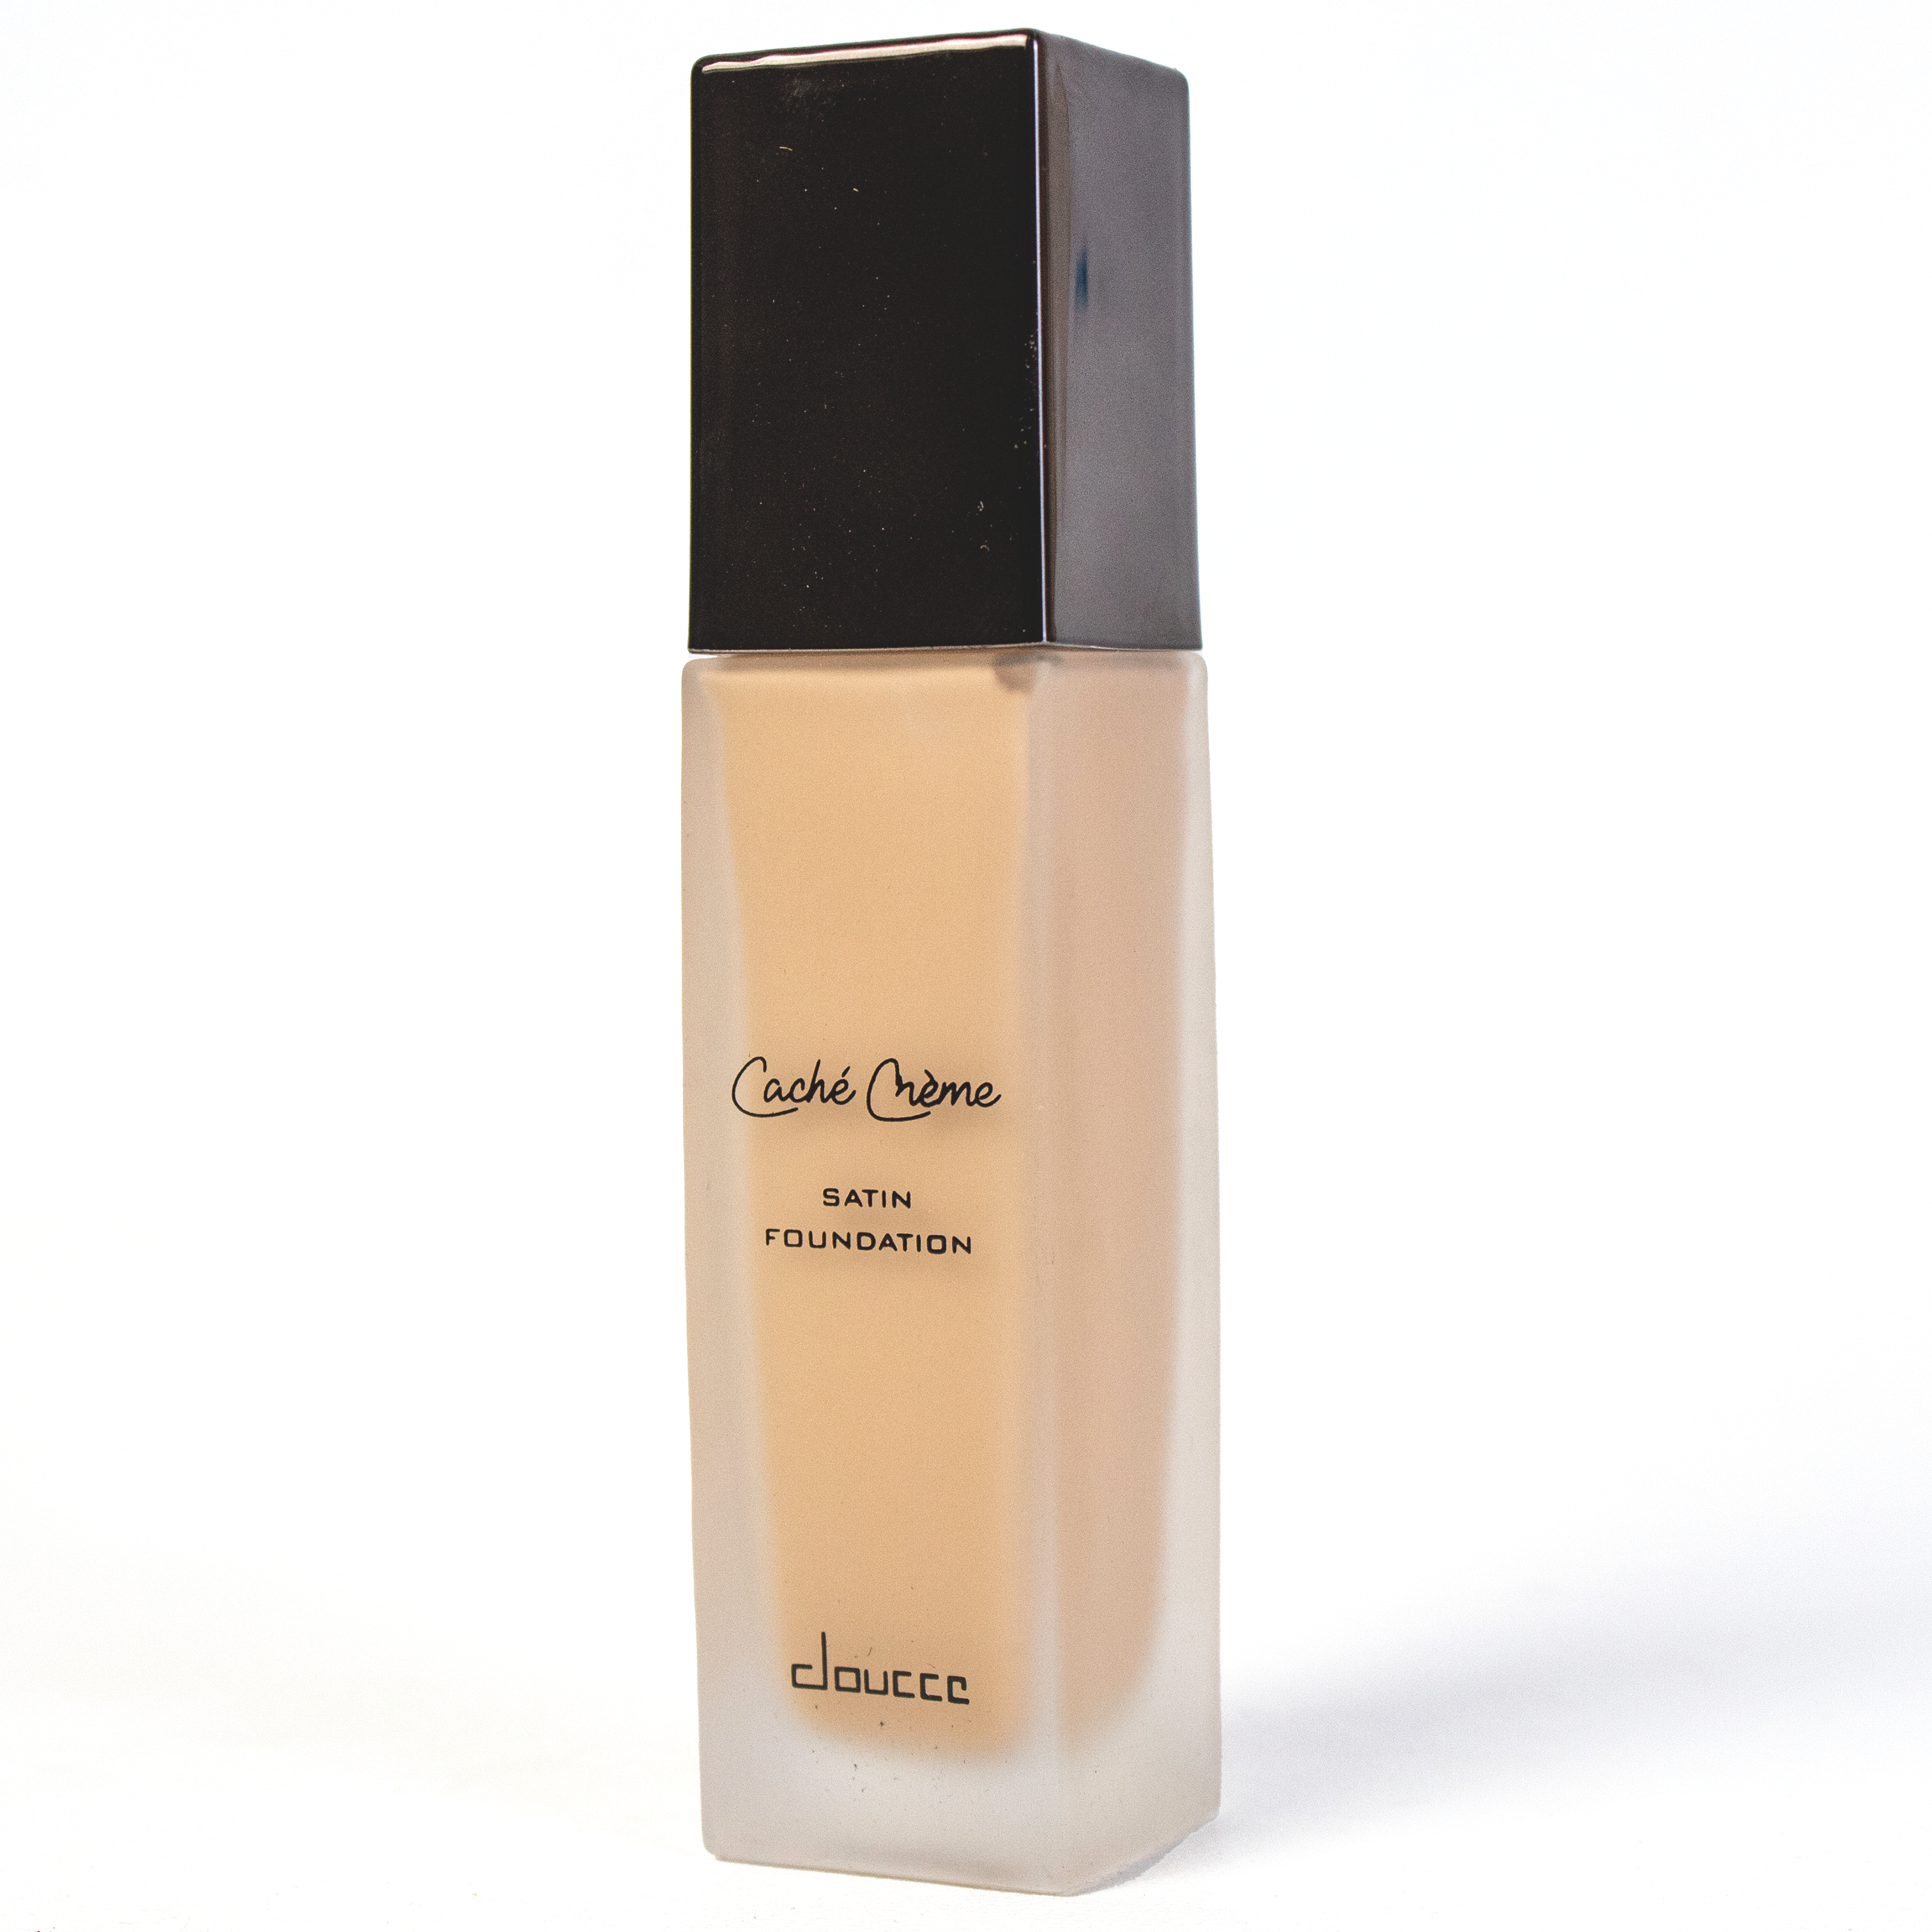 FOUNDATION DOUCCE CACHE CREME STAIN RL2-N